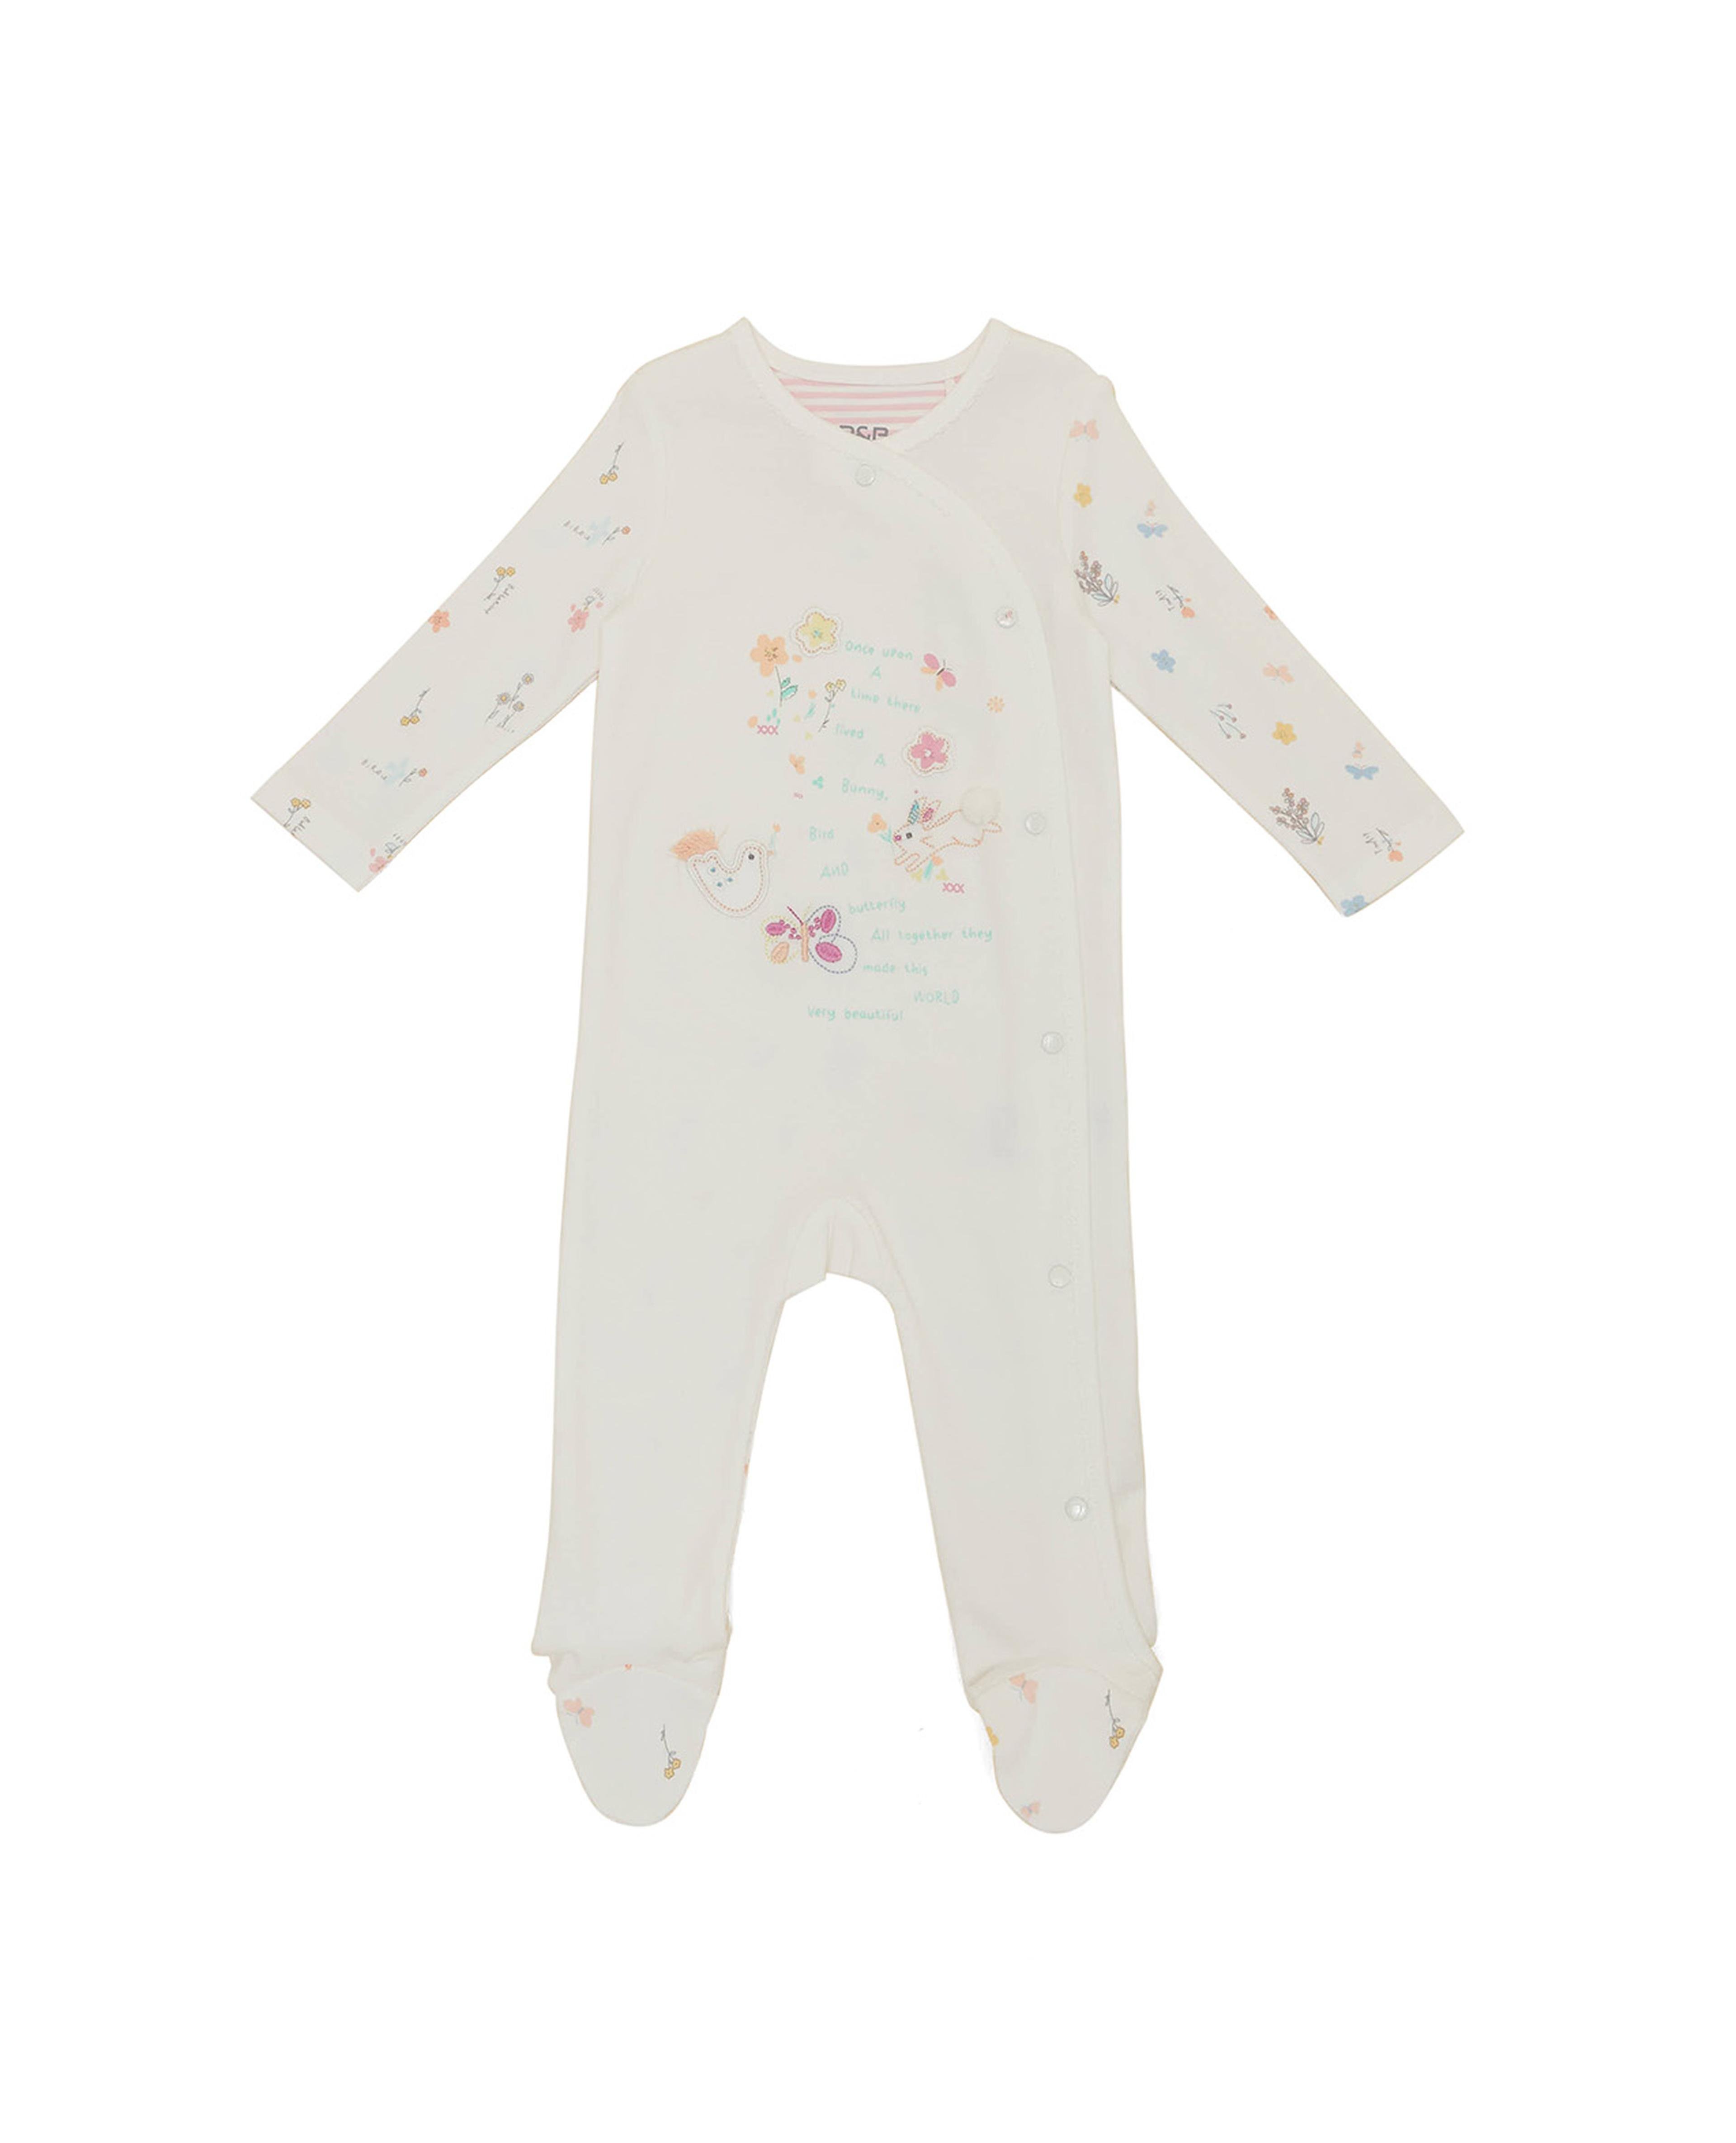 Embroidered Sleepsuit with Snap Button Closure